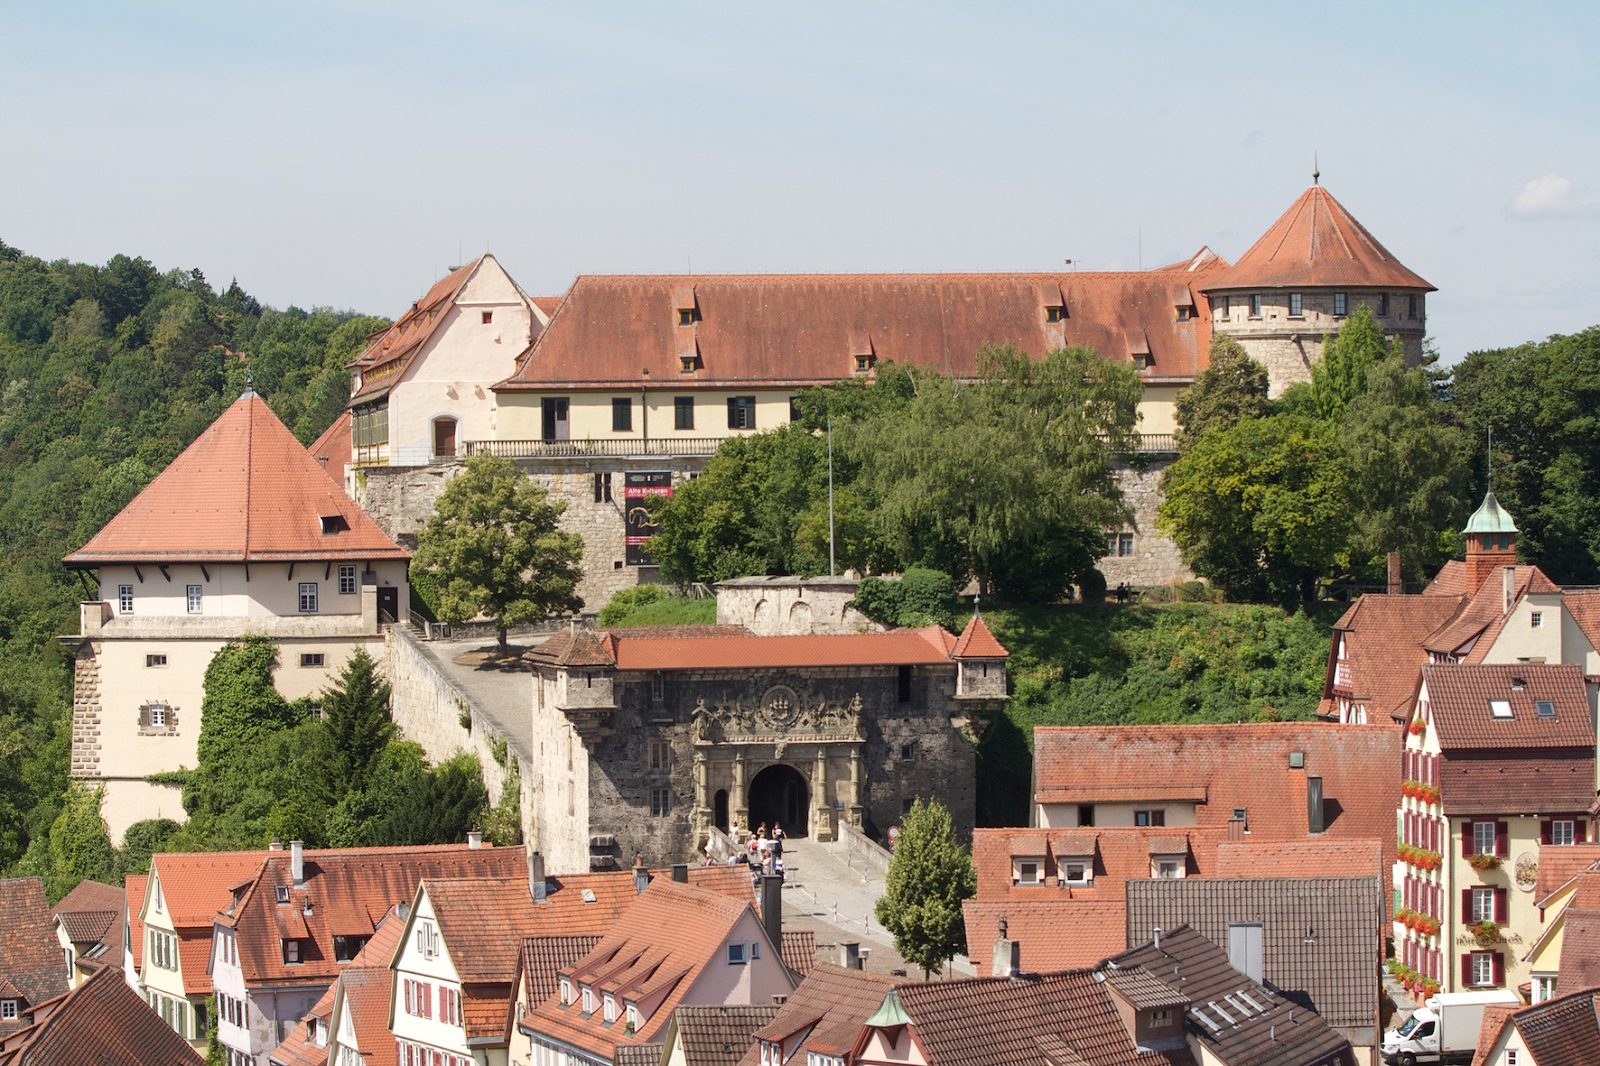 Hohentübingen Castle, the roofs of the old town in the foreground